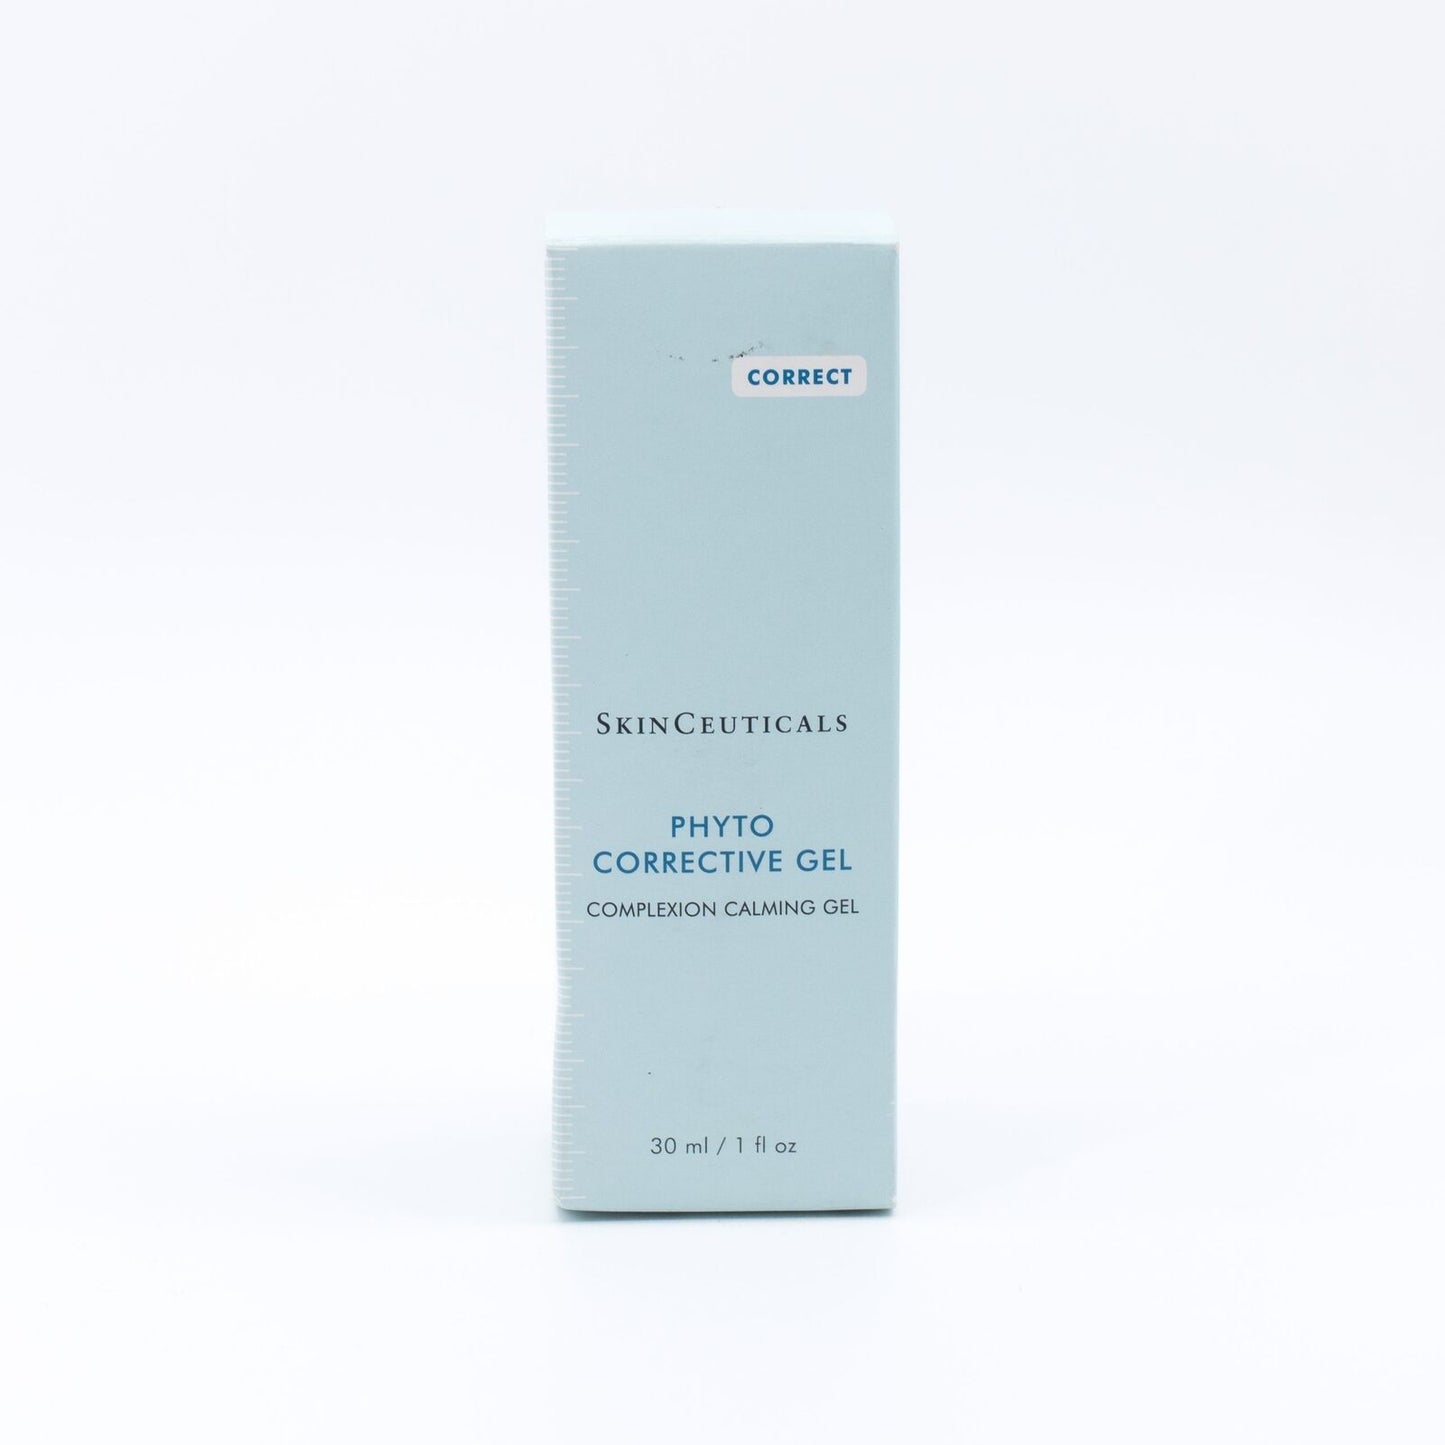 SKINCEUTICALS Phyto Corrective Gel 1oz - Small Amount Missing